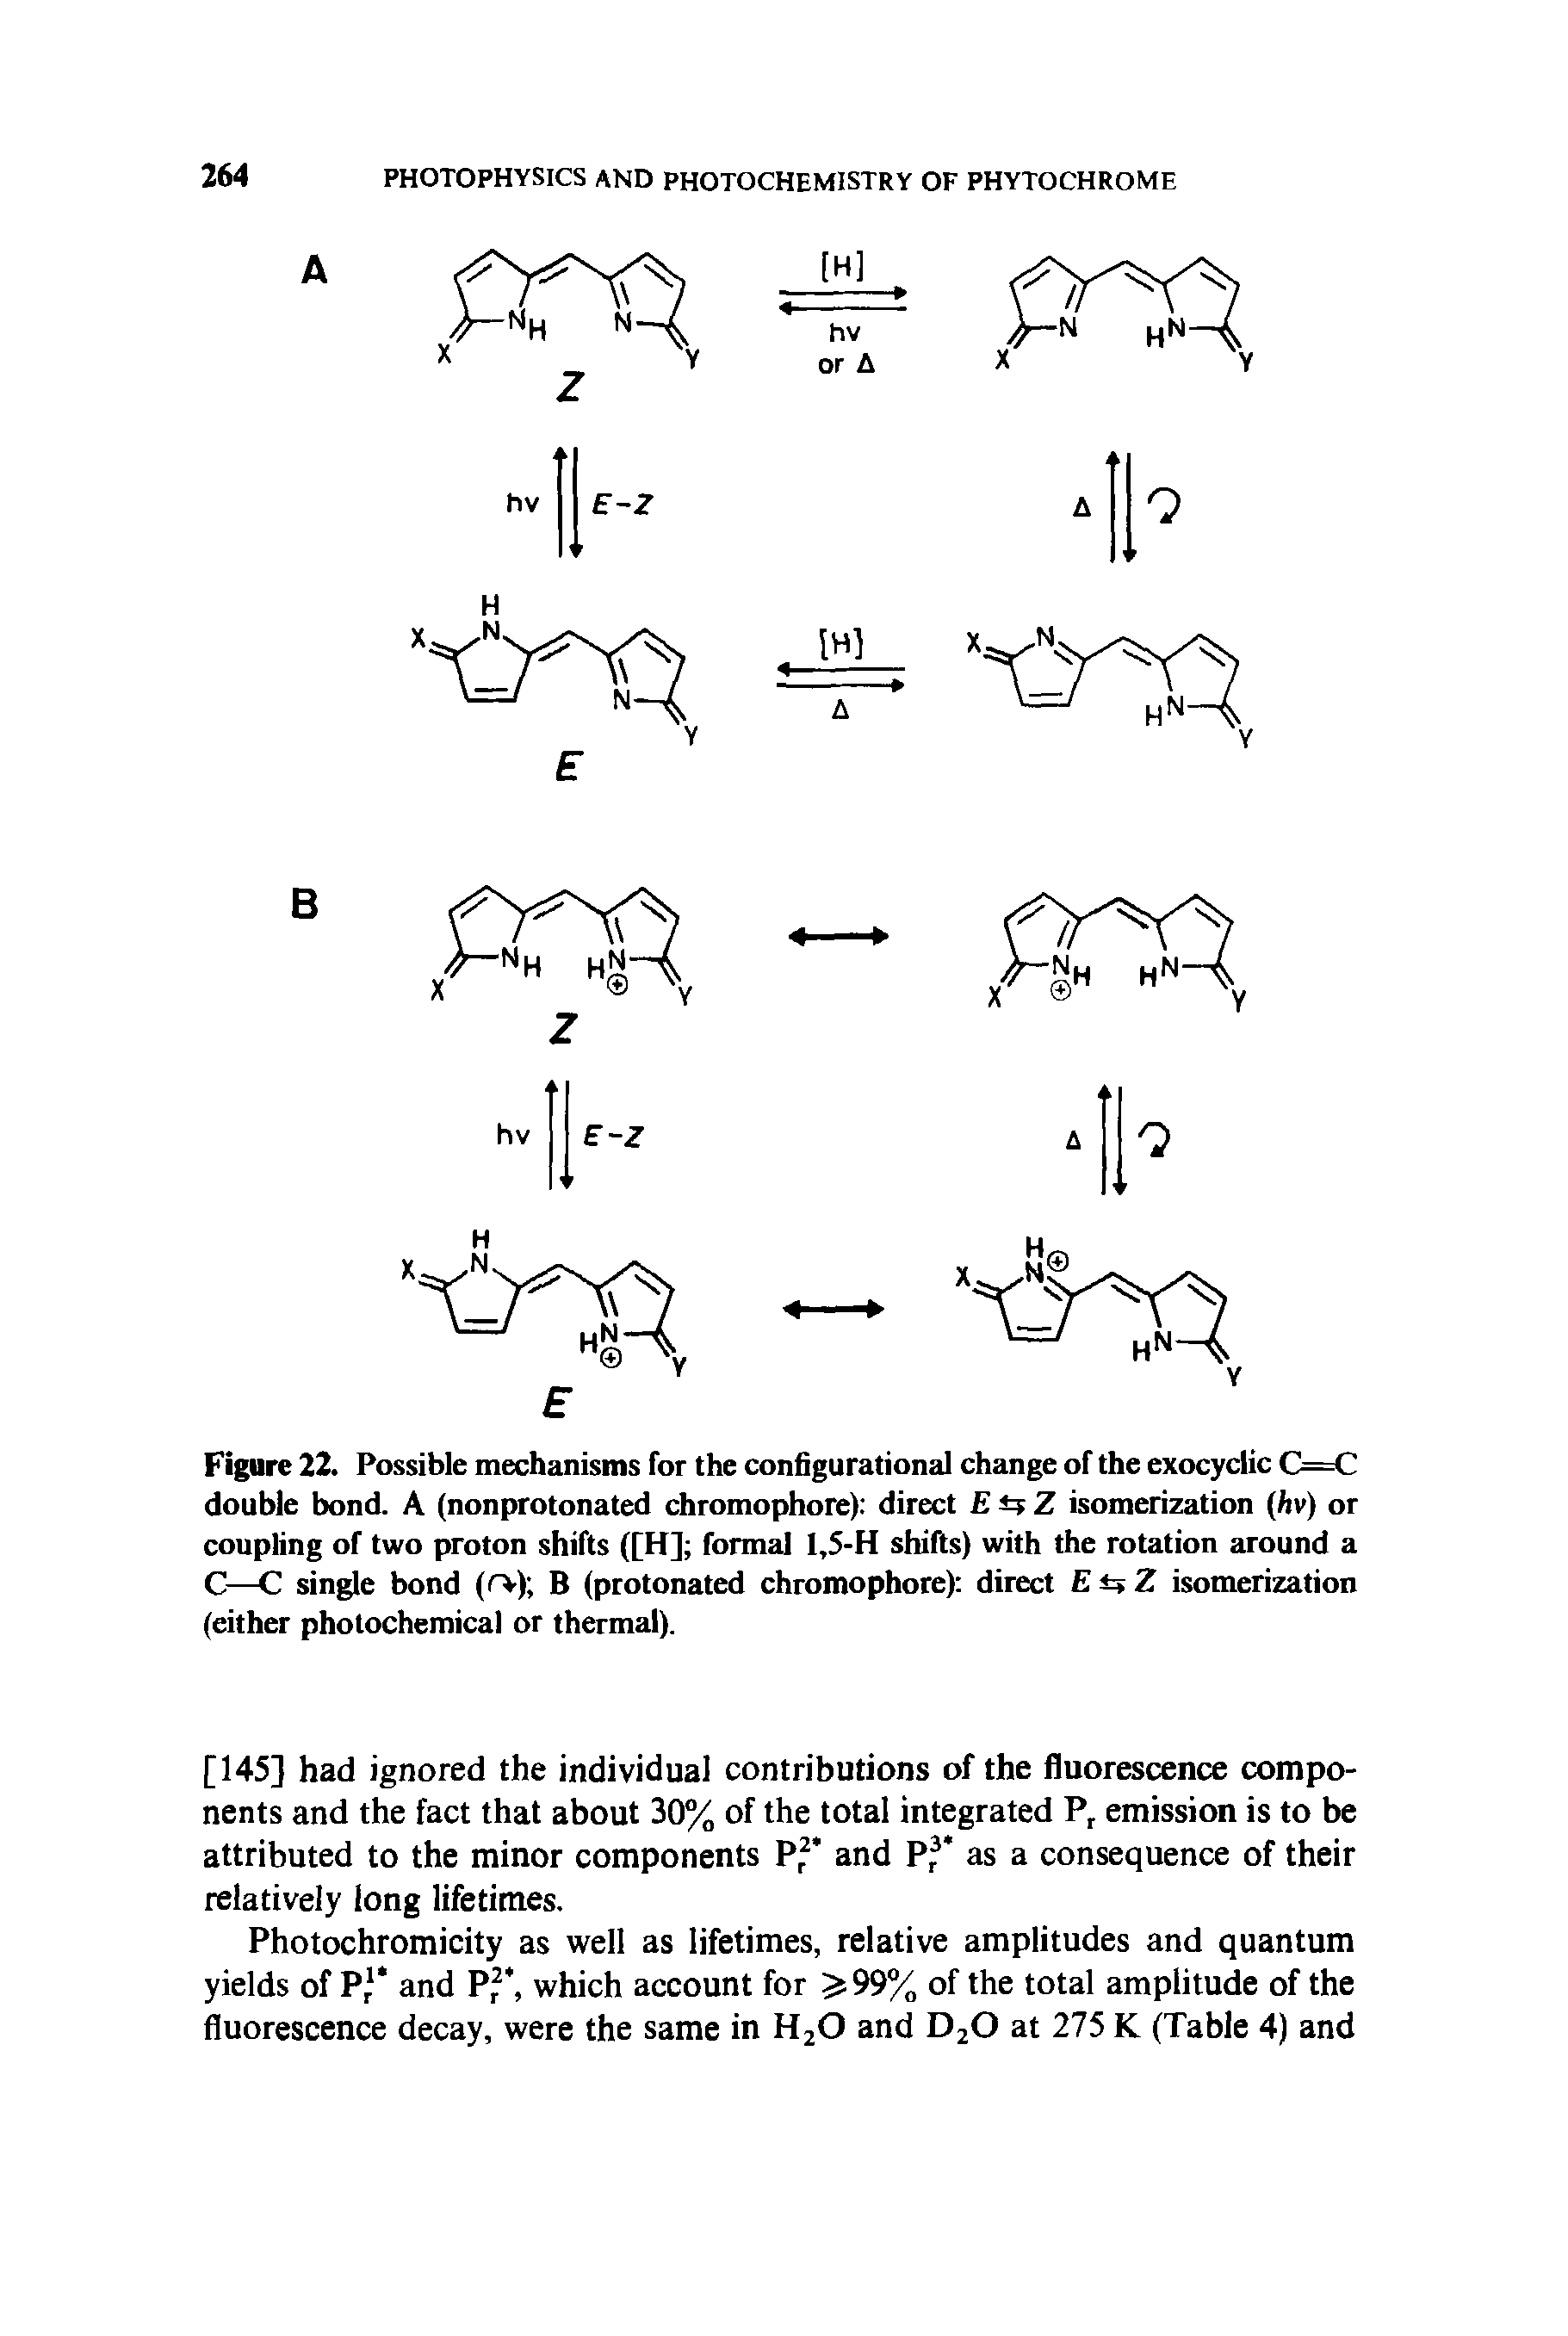 Figure 22. Possible mechanisms for the configurational change of the exocyclic C=C double bond. A (nonprotonated chromophore) direct E Z isomerization (/tv) or coupling of two proton shifts ([H] formal I,5-H shifts) with the rotation around a C—C single bond (r>) B (protonated chromophore) direct E Z isomerization (either photochemical or thermal).